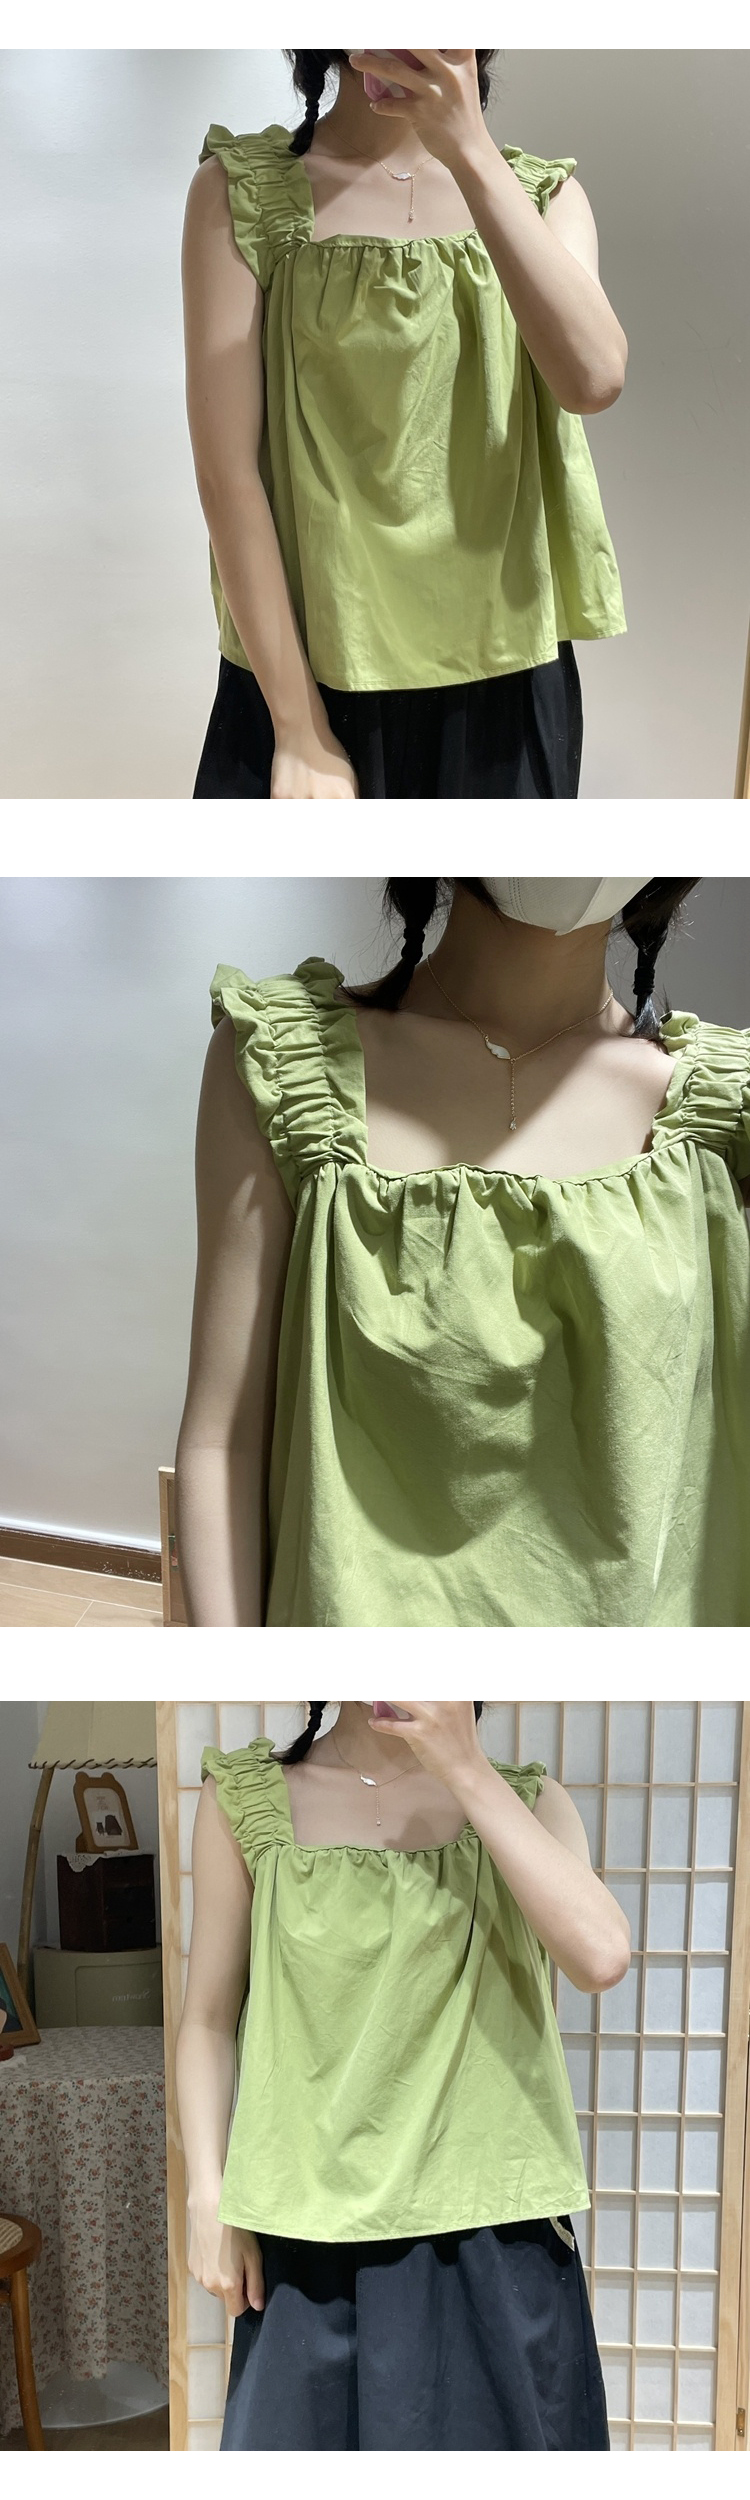 KOIN COLLECTION Square Frill Banding Sleeveless Blouse Light Green Color & Free Size 8